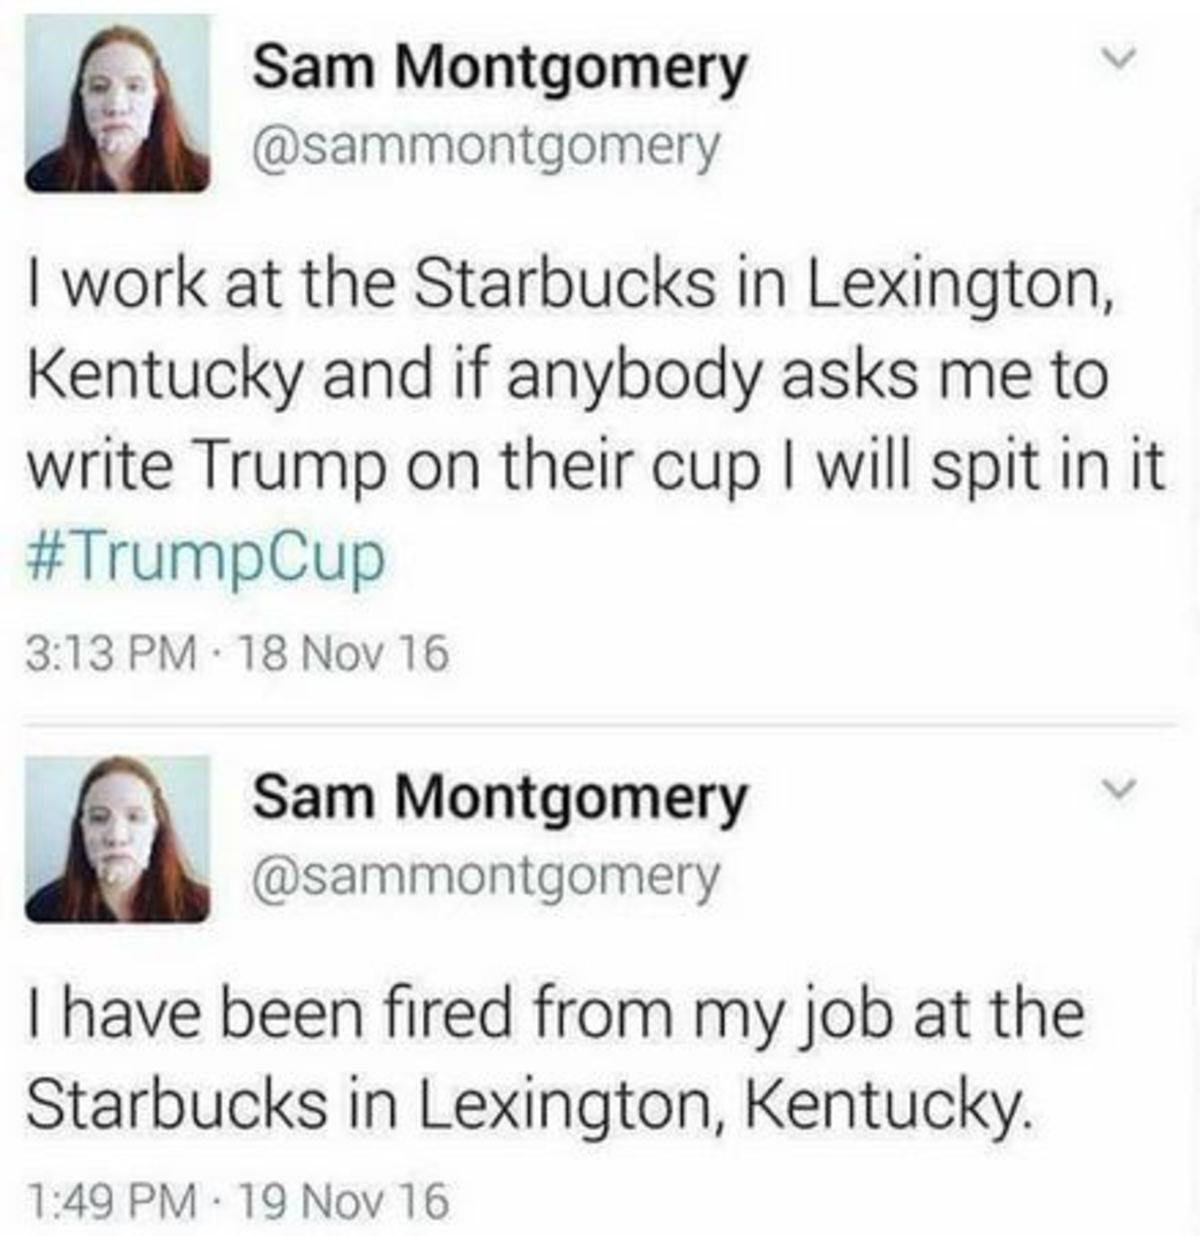 document - Sam Montgomery I work at the Starbucks in Lexington, Kentucky and if anybody asks me to write Trump on their cup I will spit in it . 18 Nov 16 Sam Montgomery I have been fired from my job at the Starbucks in Lexington, Kentucky. 19 Nov 16